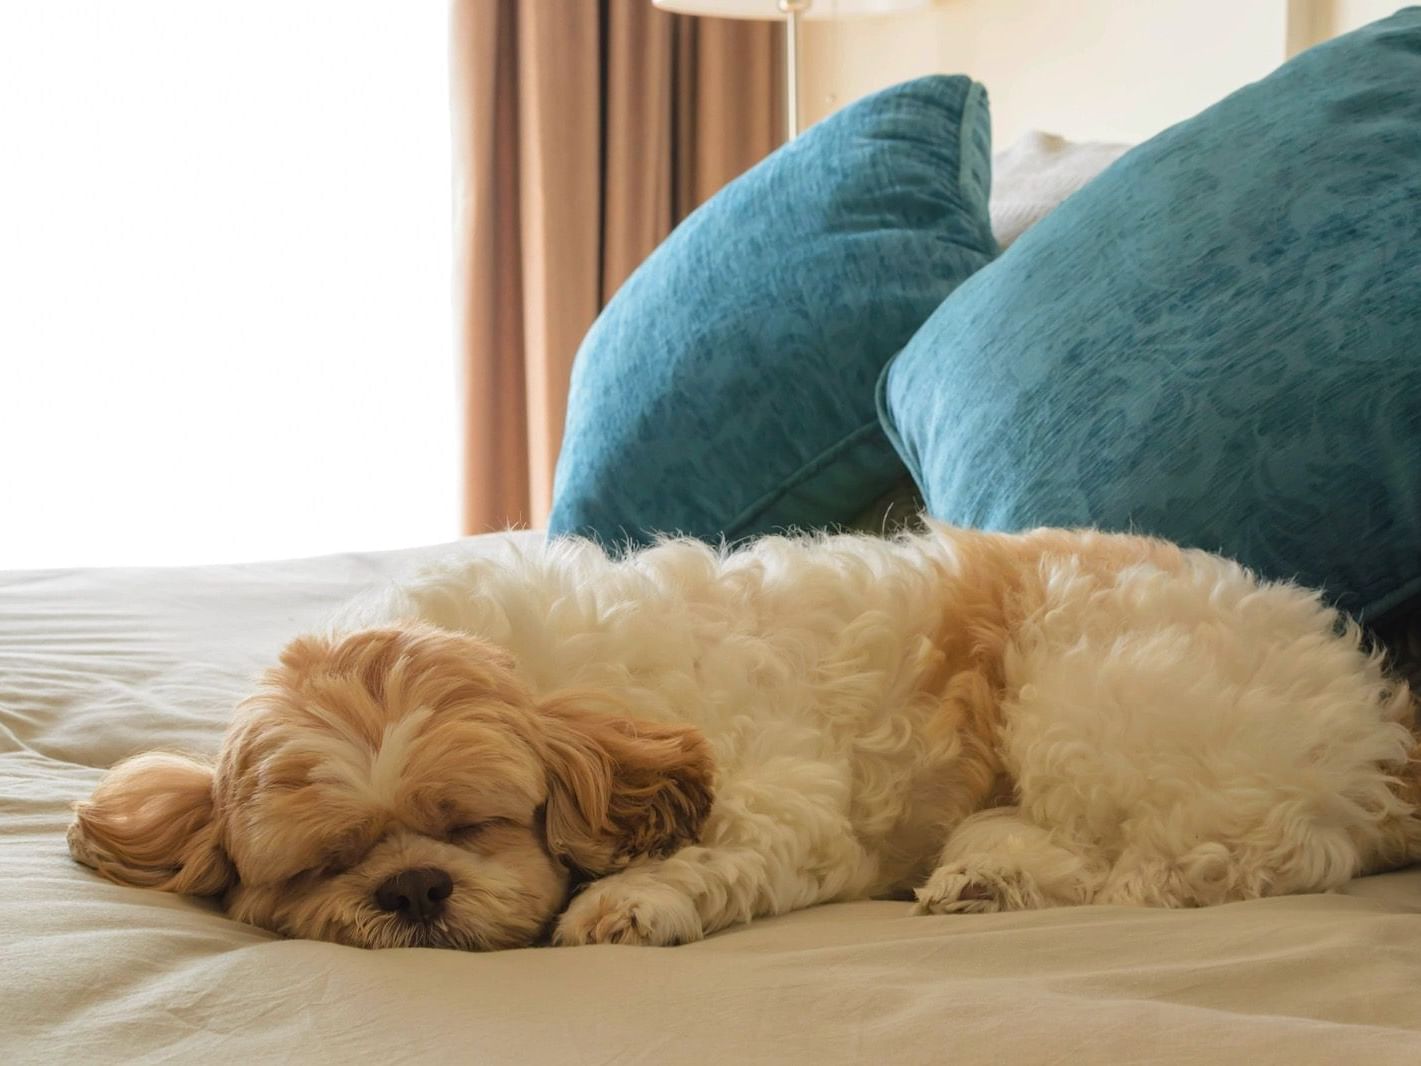 Dog friendly in selected rooms at the Alexis Park Resort